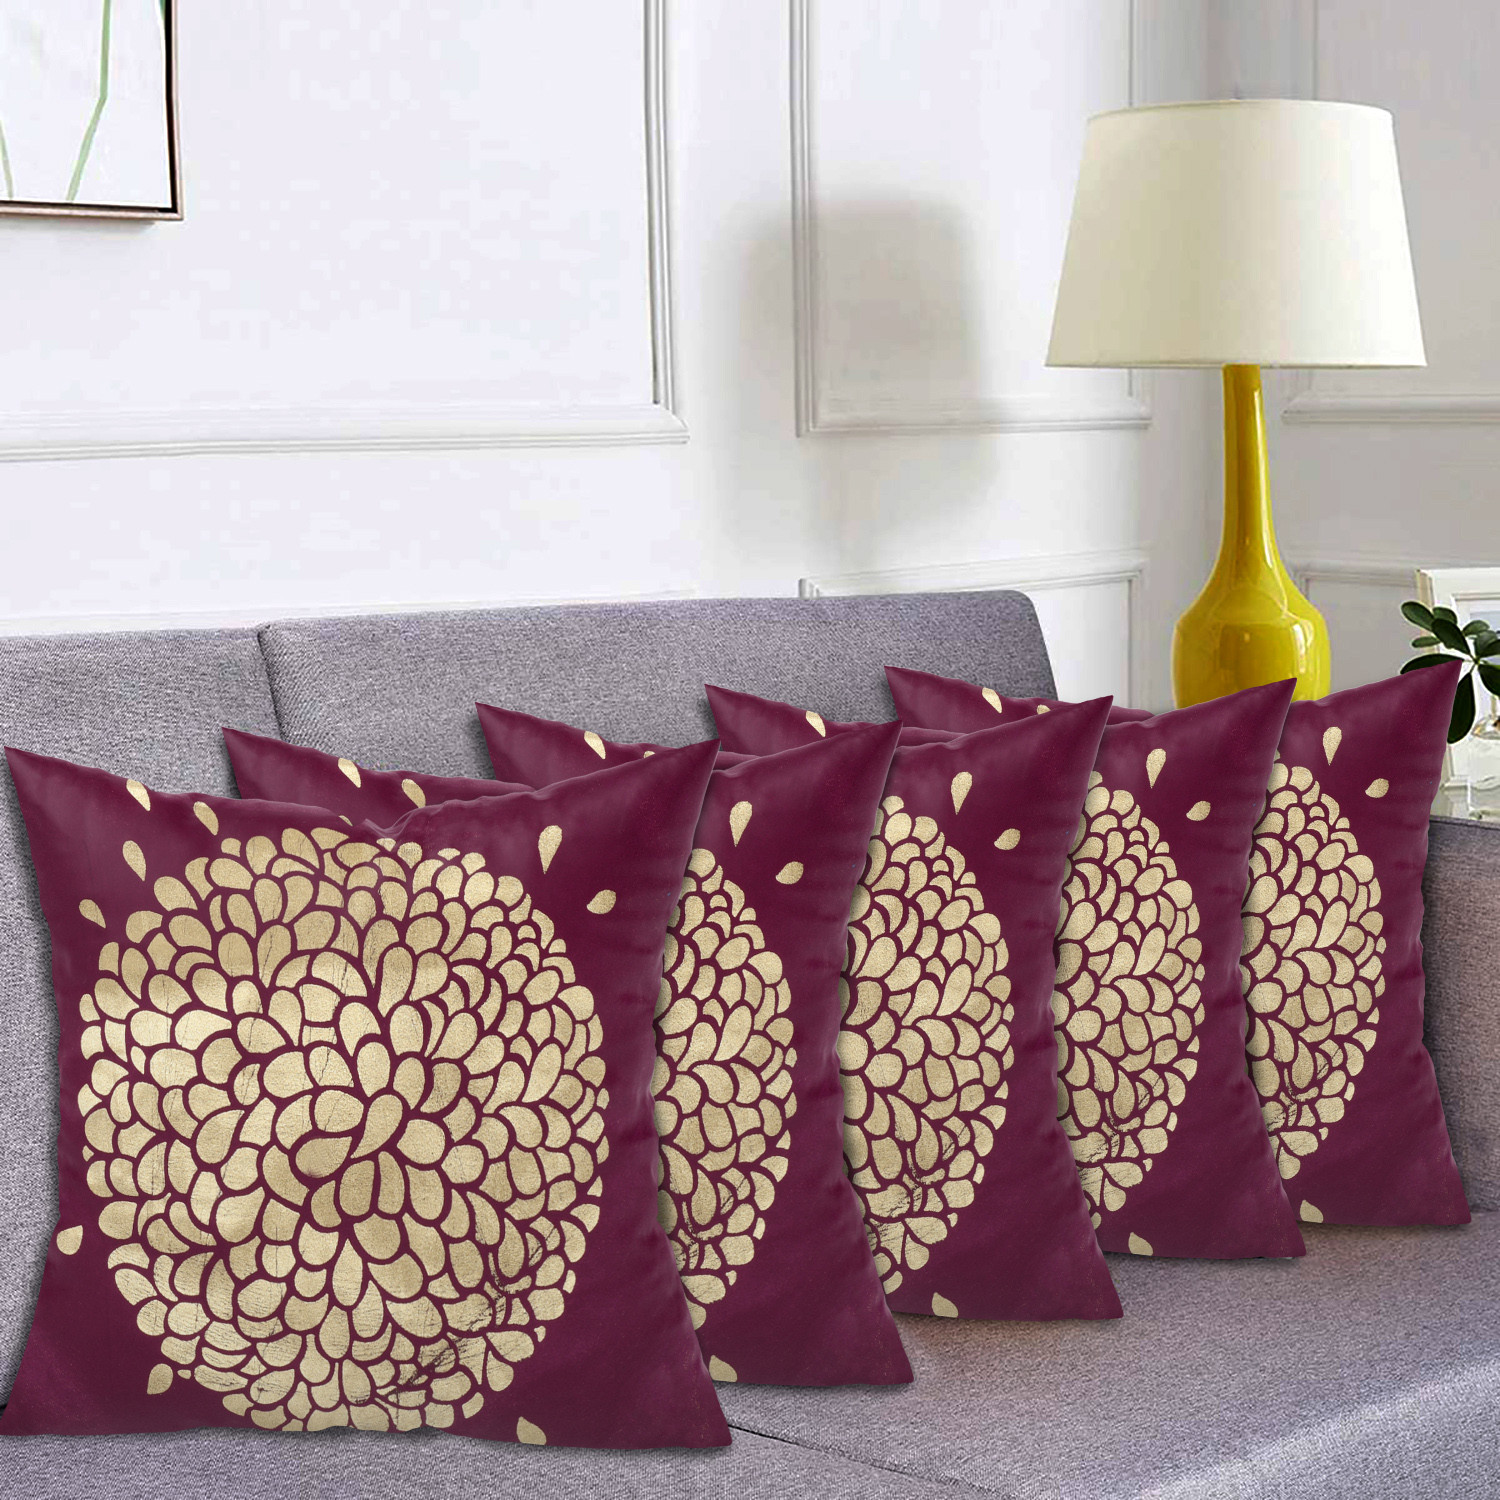 Kuber Industries Rangoli Print Soft Decorative Square Cushion Cover, Cushion Case For Sofa Couch Bed 16x16 Inch-(Purple)